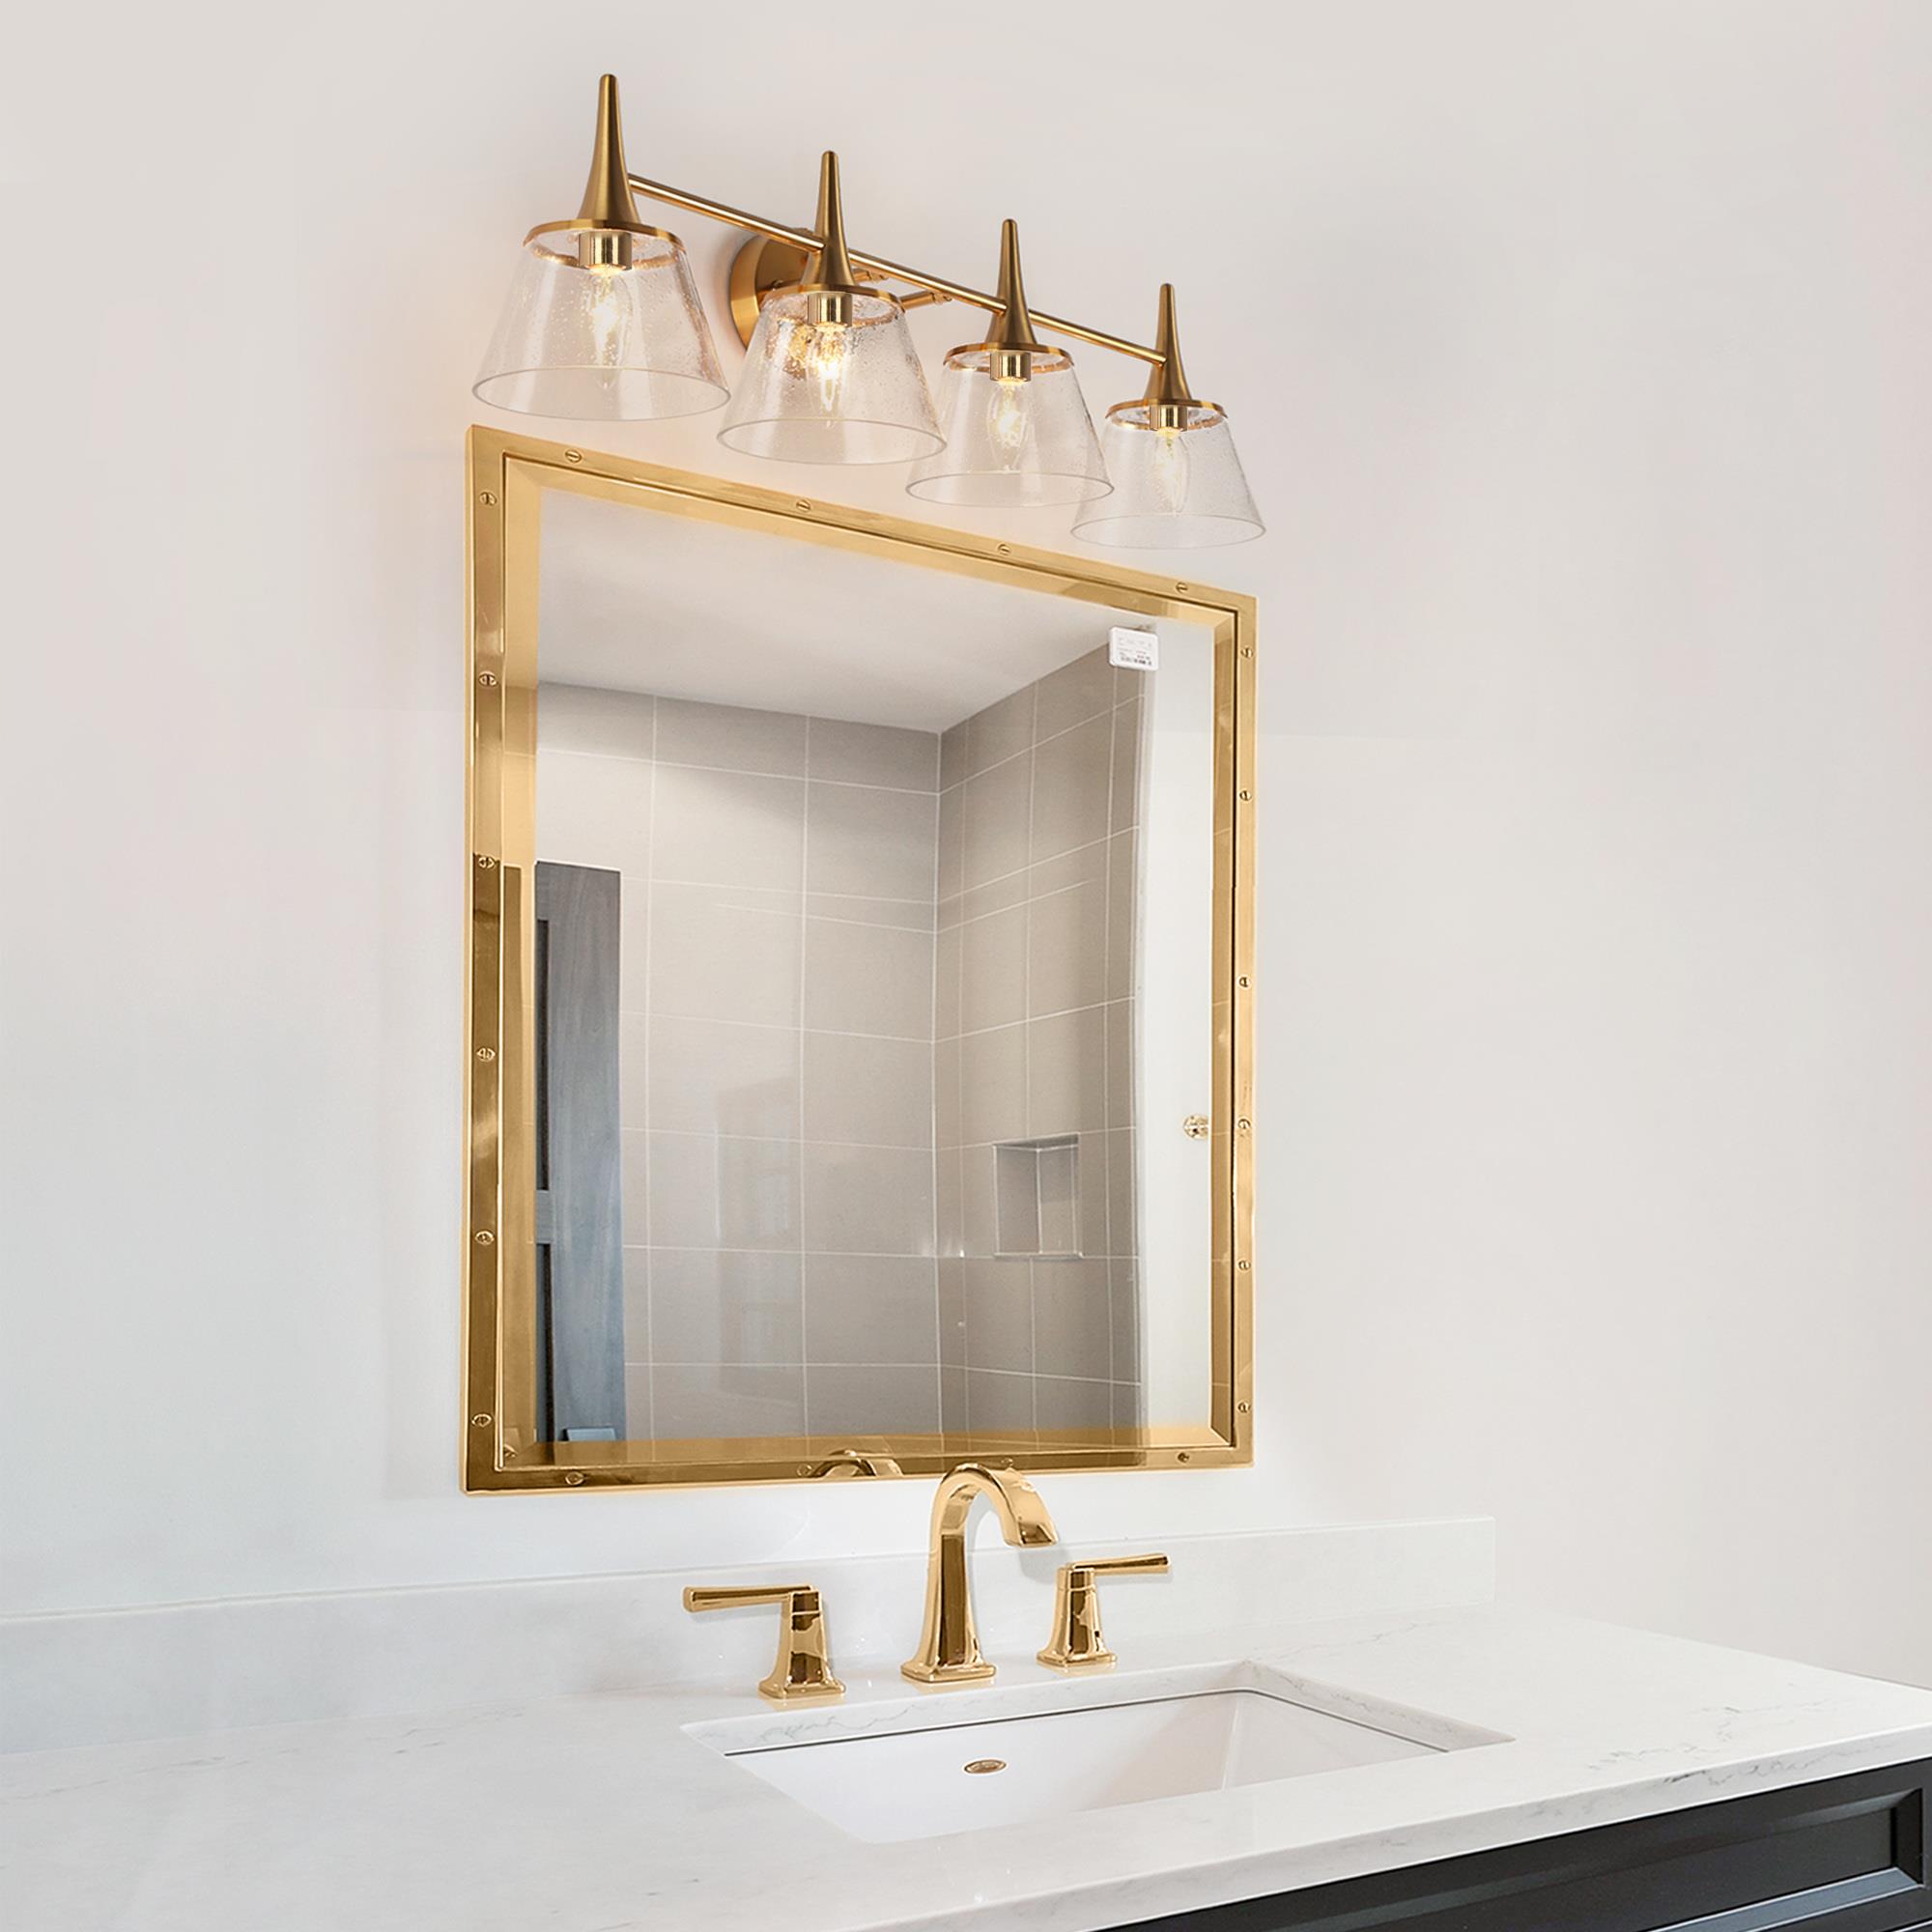 LNC Idaikos 29.1-in 4-Light Polished Gold and White Dome LED Modern/Contemporary Vanity Light | LF3ERFQ76W4E8C